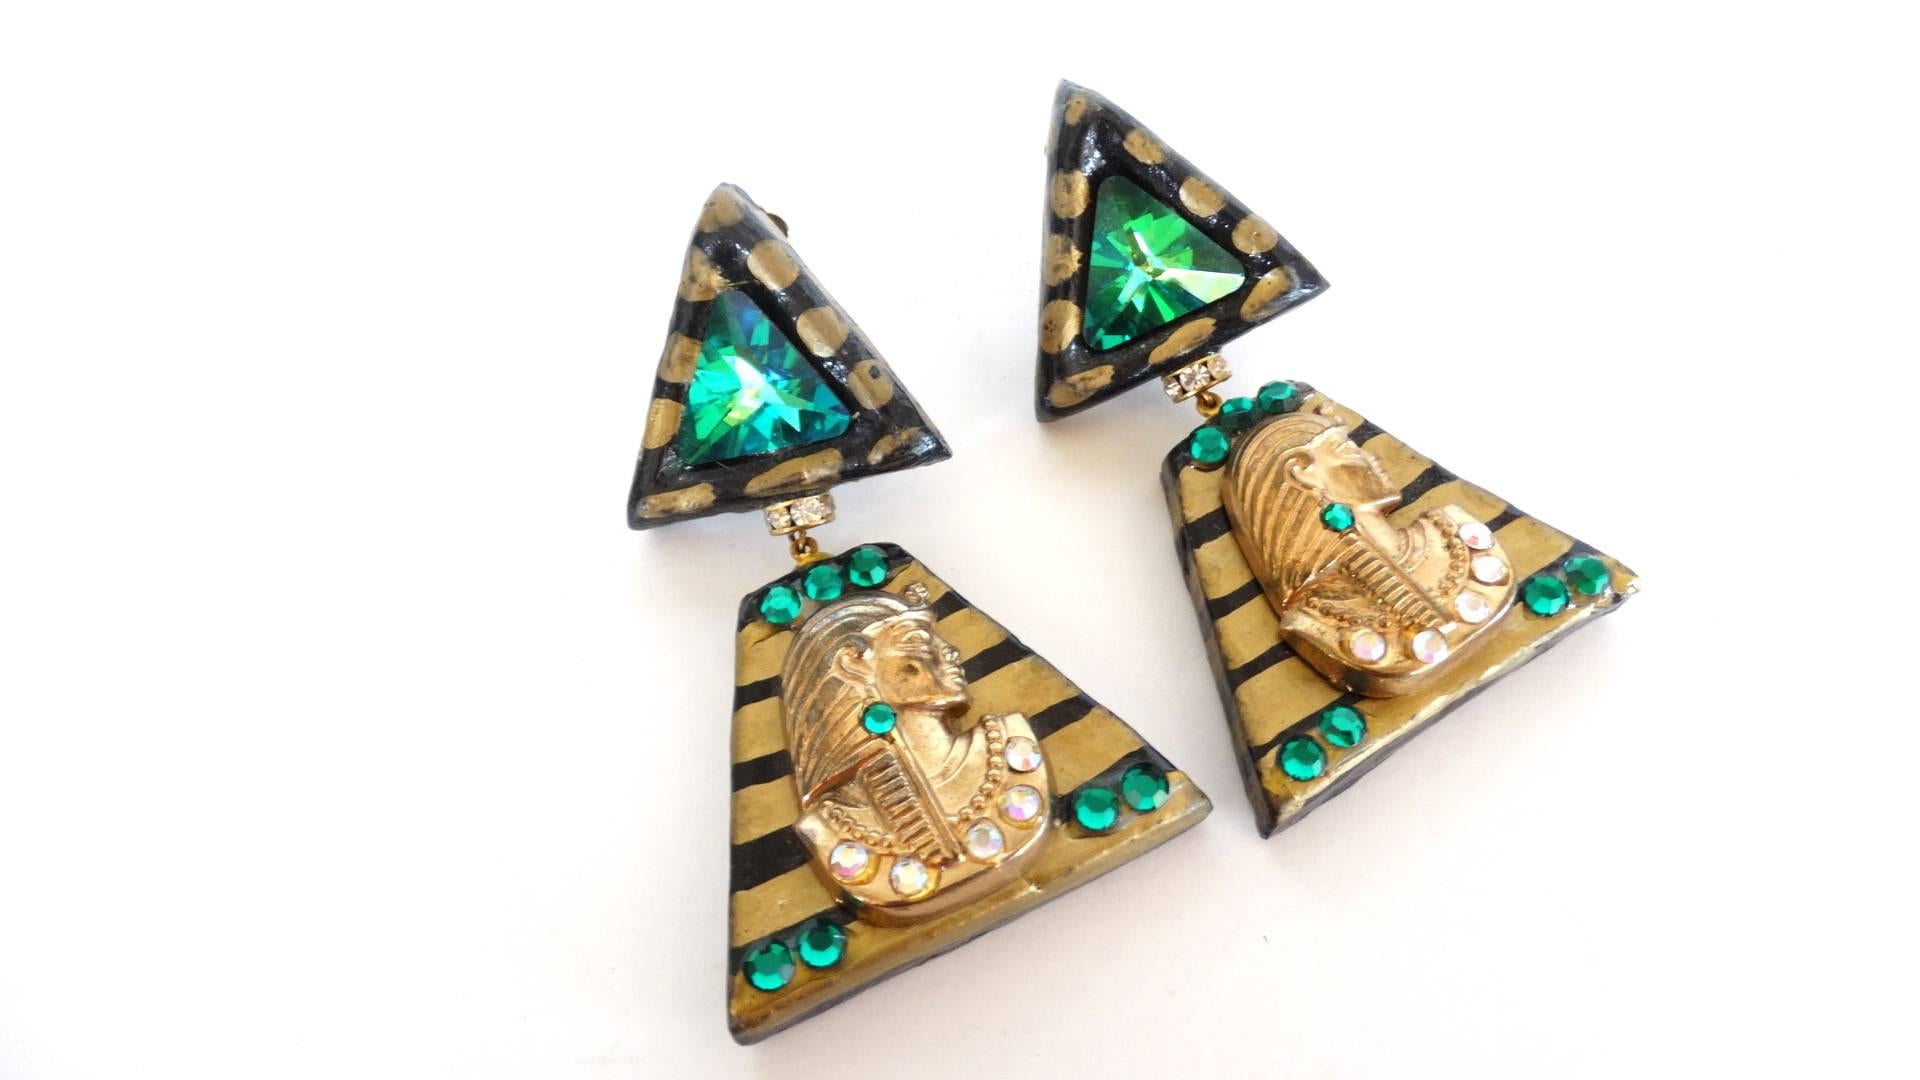 Add a touch of Egyptian Revival to your look, these earrings are fabulous! Handmade earrings with Cleopatra face turned to the side, accented with large green rhinestone. Hand painted design surrounds the beautiful design. Light in weight, signed by